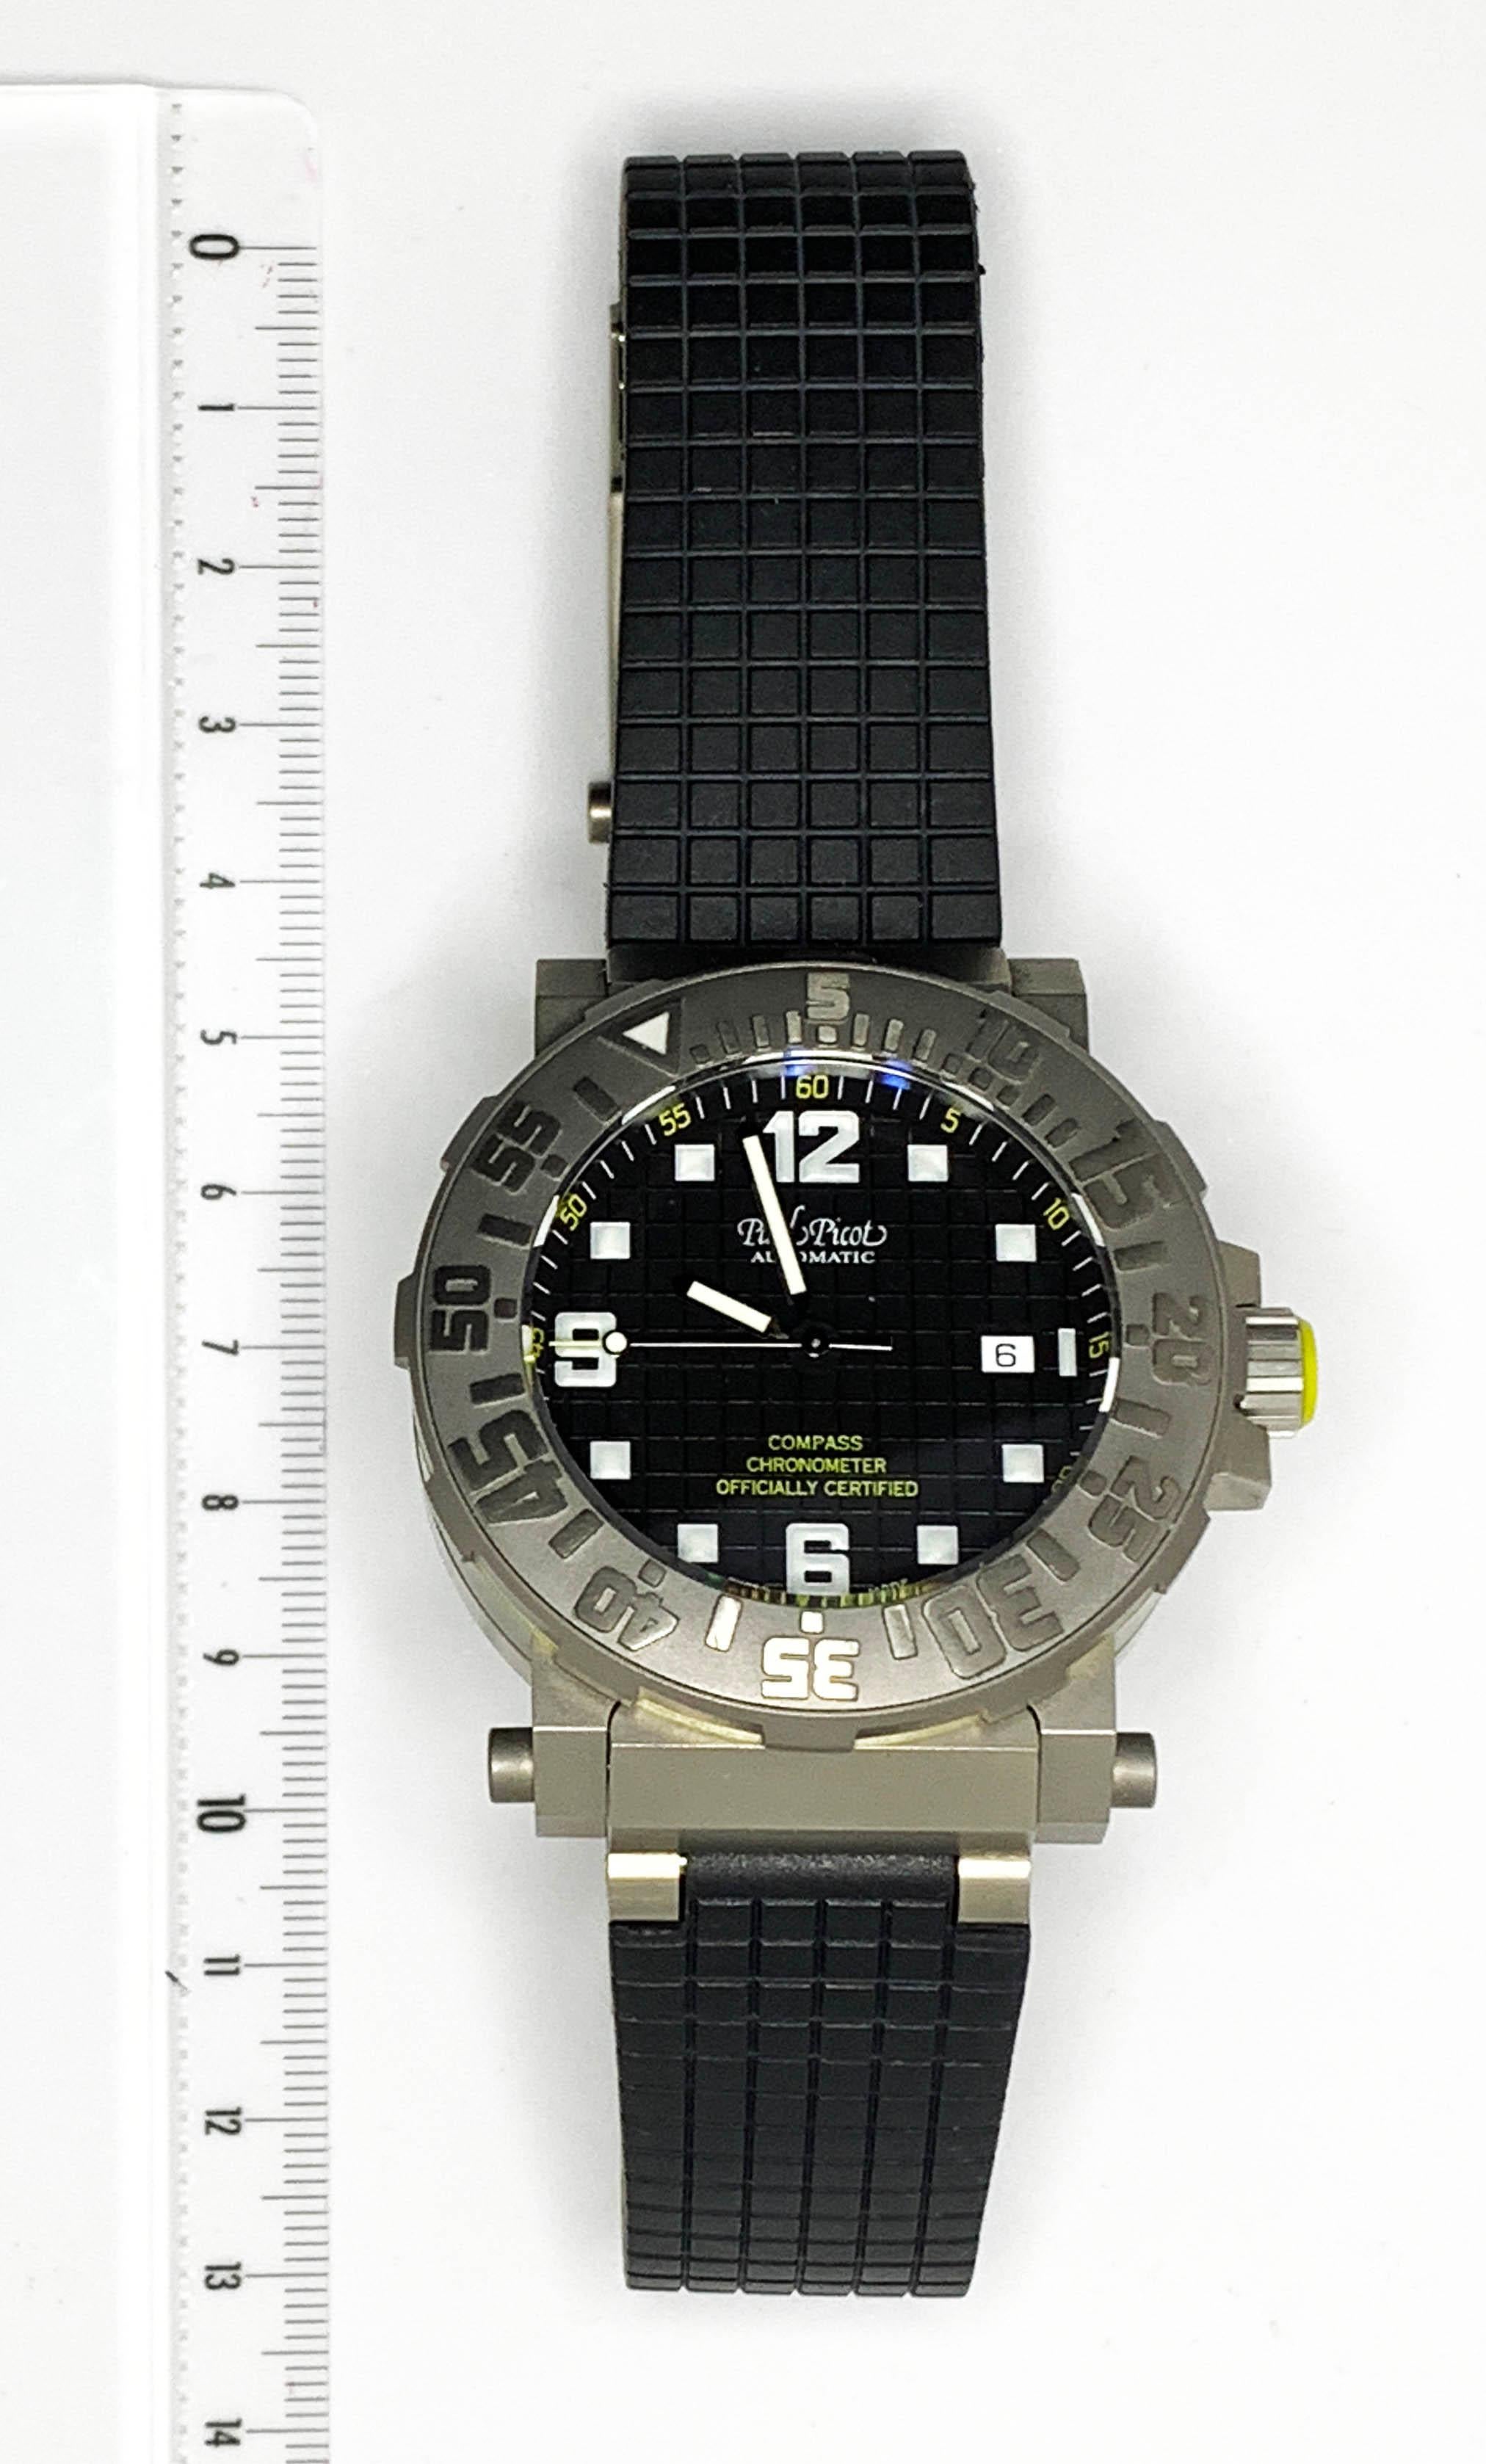 Paul Picot
The Diver
rare diver's watch
titanium and rubber
automatic
certified chronometer
water-resistant to 100 metres
date at 3 o'clock
retractable case to make room for a compass
circa 2008
new from stock
box/paper
new value: 7500 euros
2500